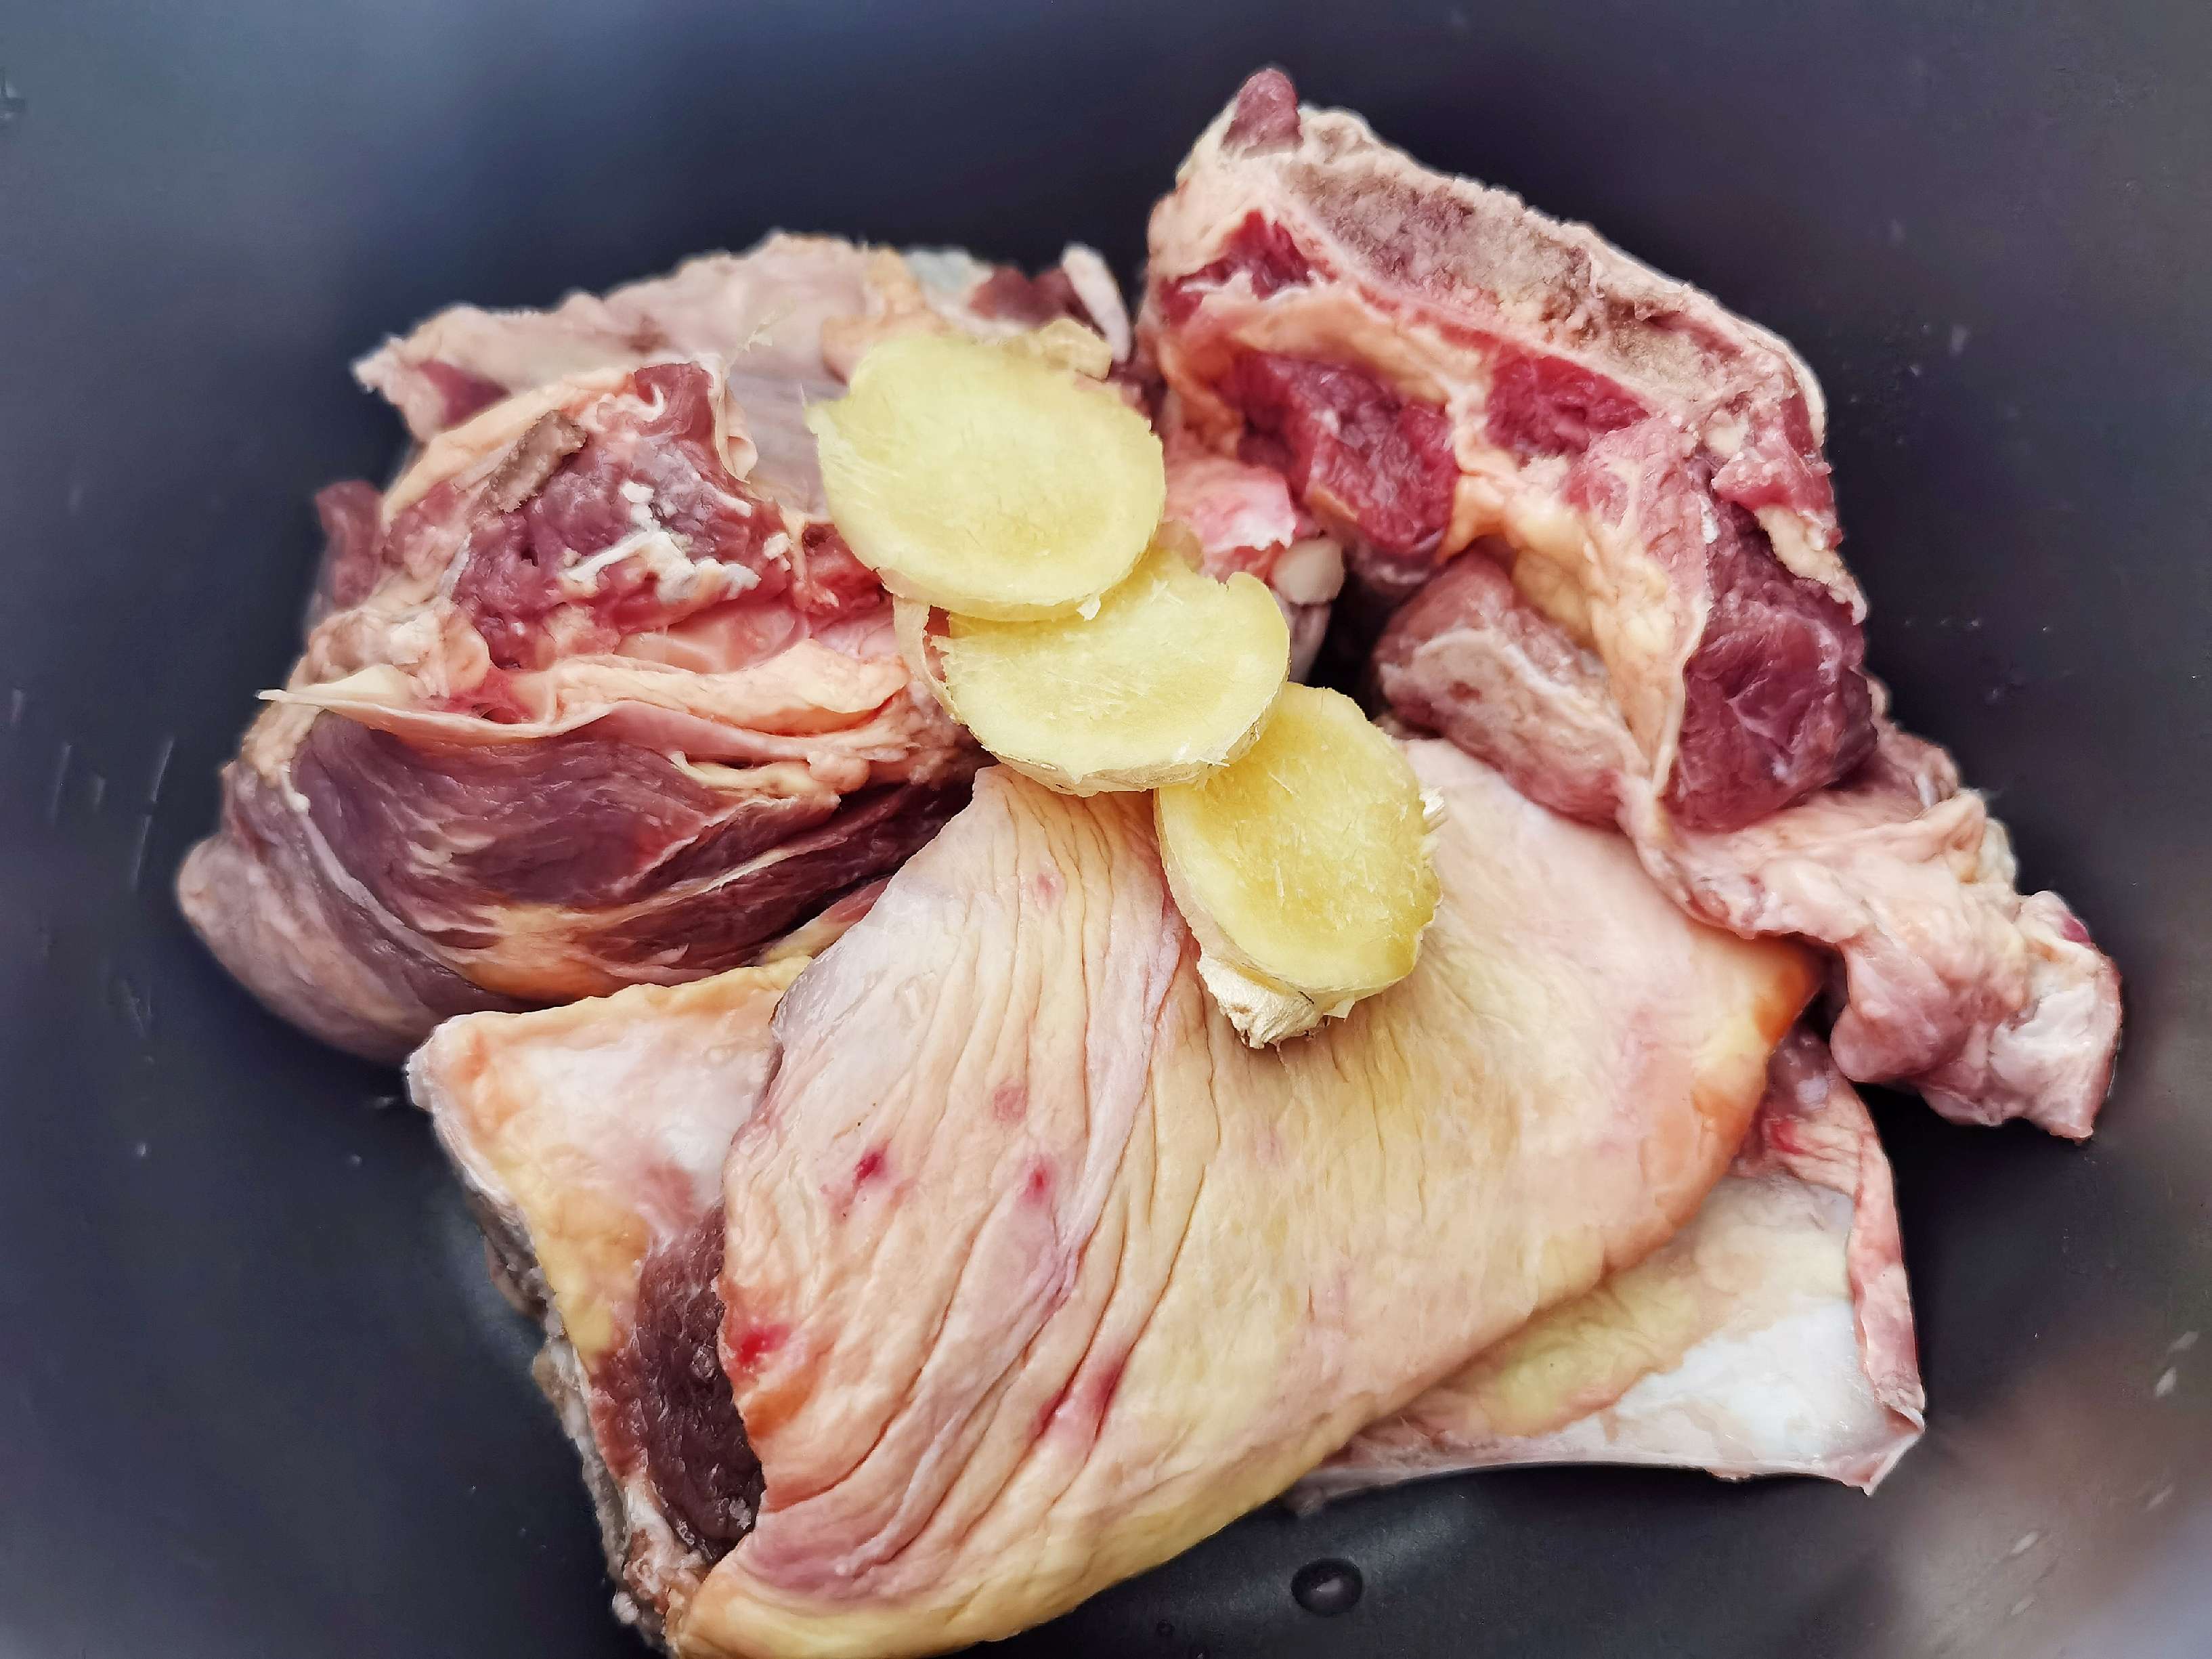 It's Time to Have A Steak Hot Pot for The Winter! Shabu-shabu and Meat are Not Forever recipe